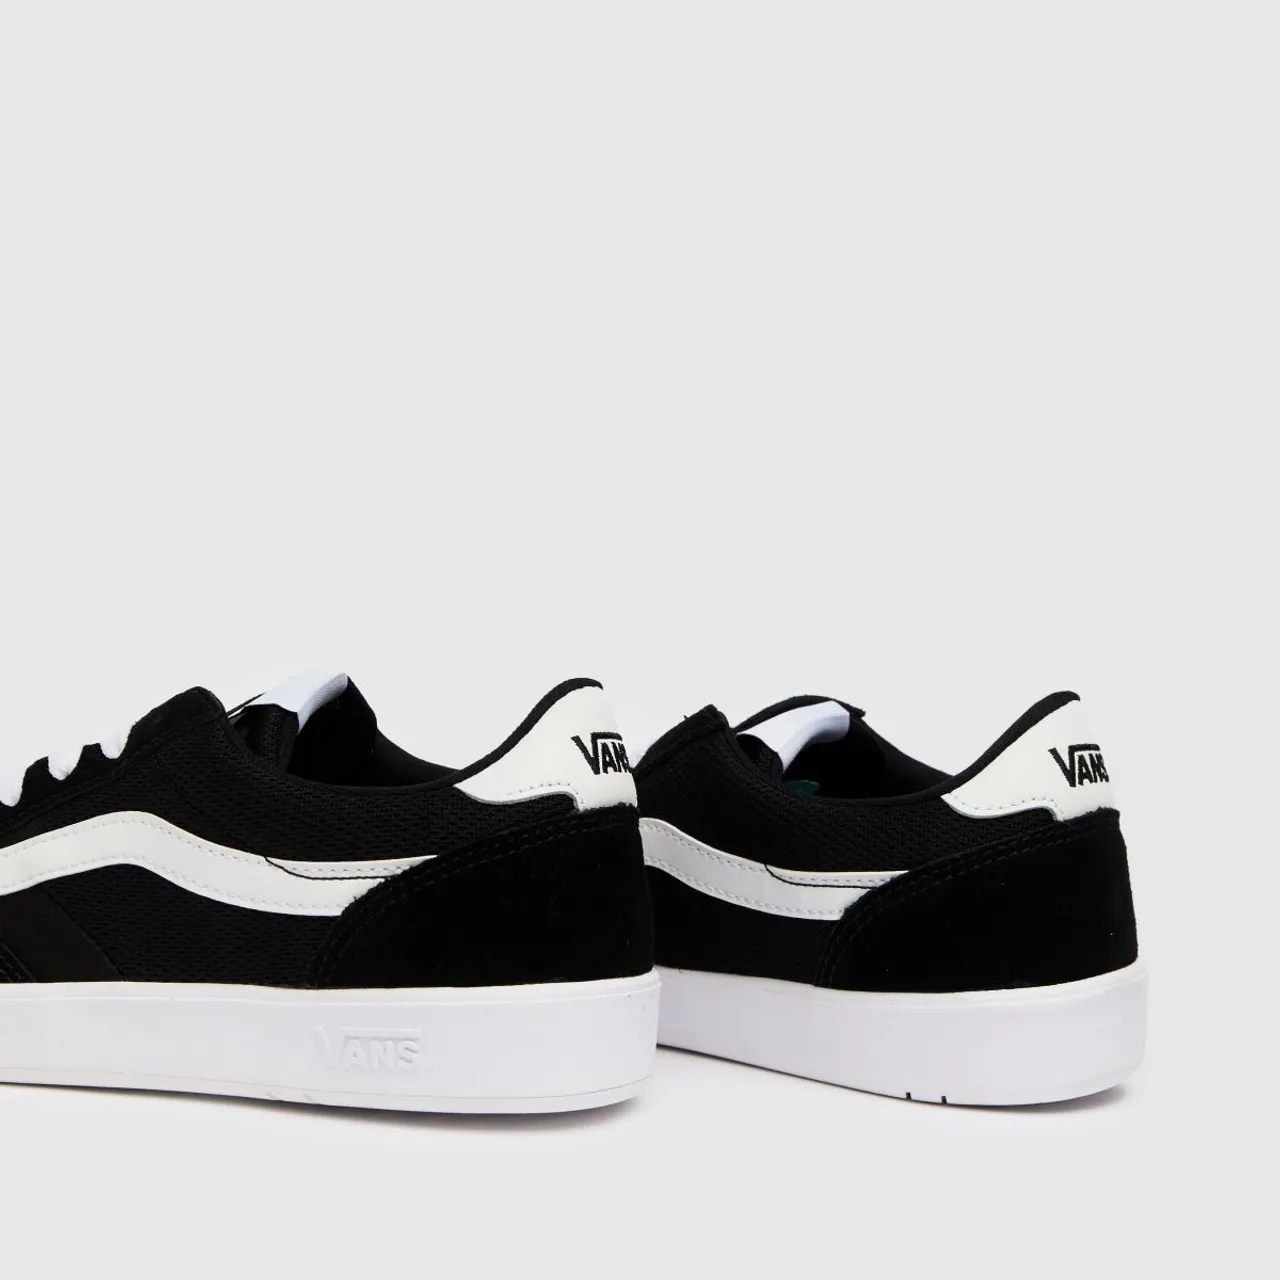 Vans Cruze To Cc Trainers In Black & White